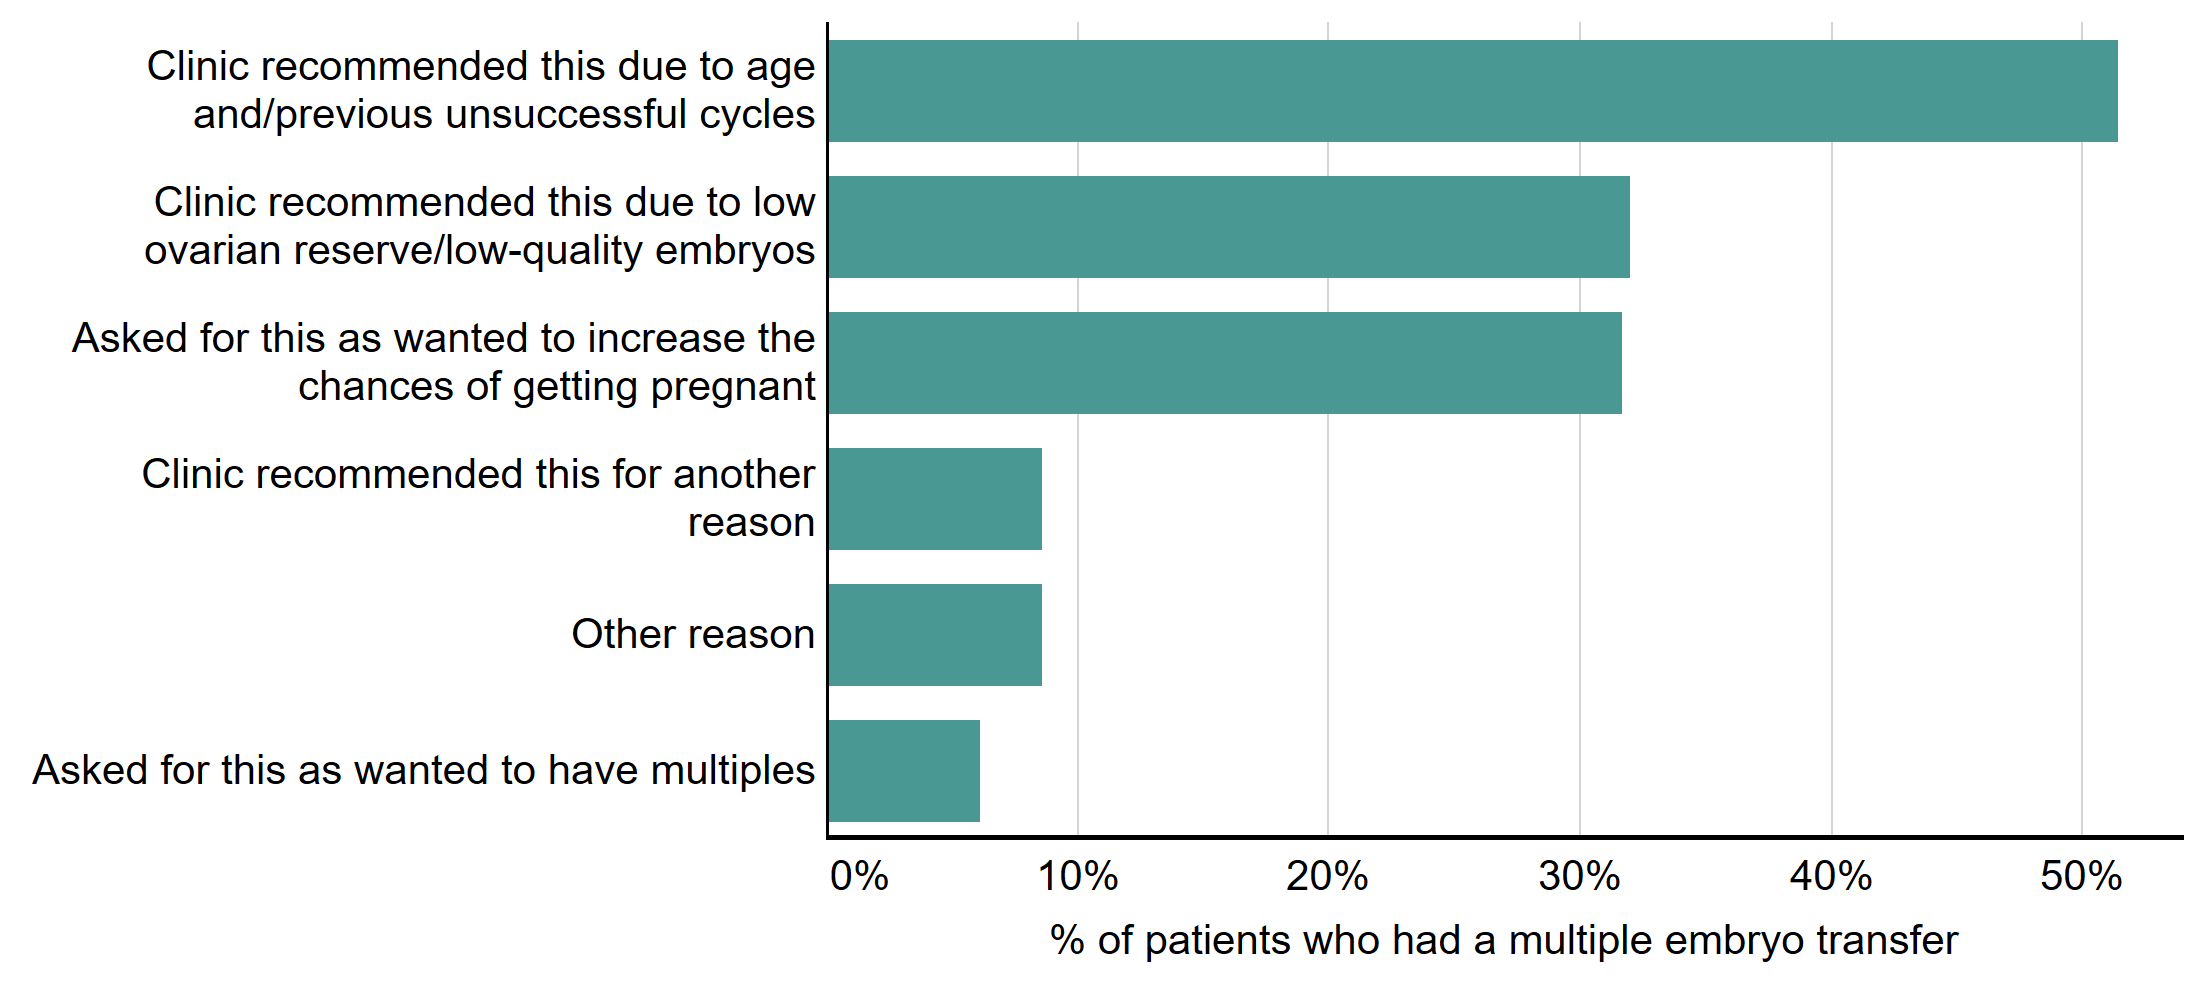 Figure 5: Reasons for having a multiple embryo transfer. Reasons for having a multiple embryo transfer, 2021. This bar chart shows the reasons why patients had a multiple embryo transfer. The most common reason was a recommendation from the clinic due to patient age or previous unsuccessful cycles (51%). A third (32%) of patients asked for a multiple embryo transfer to increase their chances of getting pregnant. An accessible form of the underlying data for this figure can be downloaded at the start of the report in .xls format.